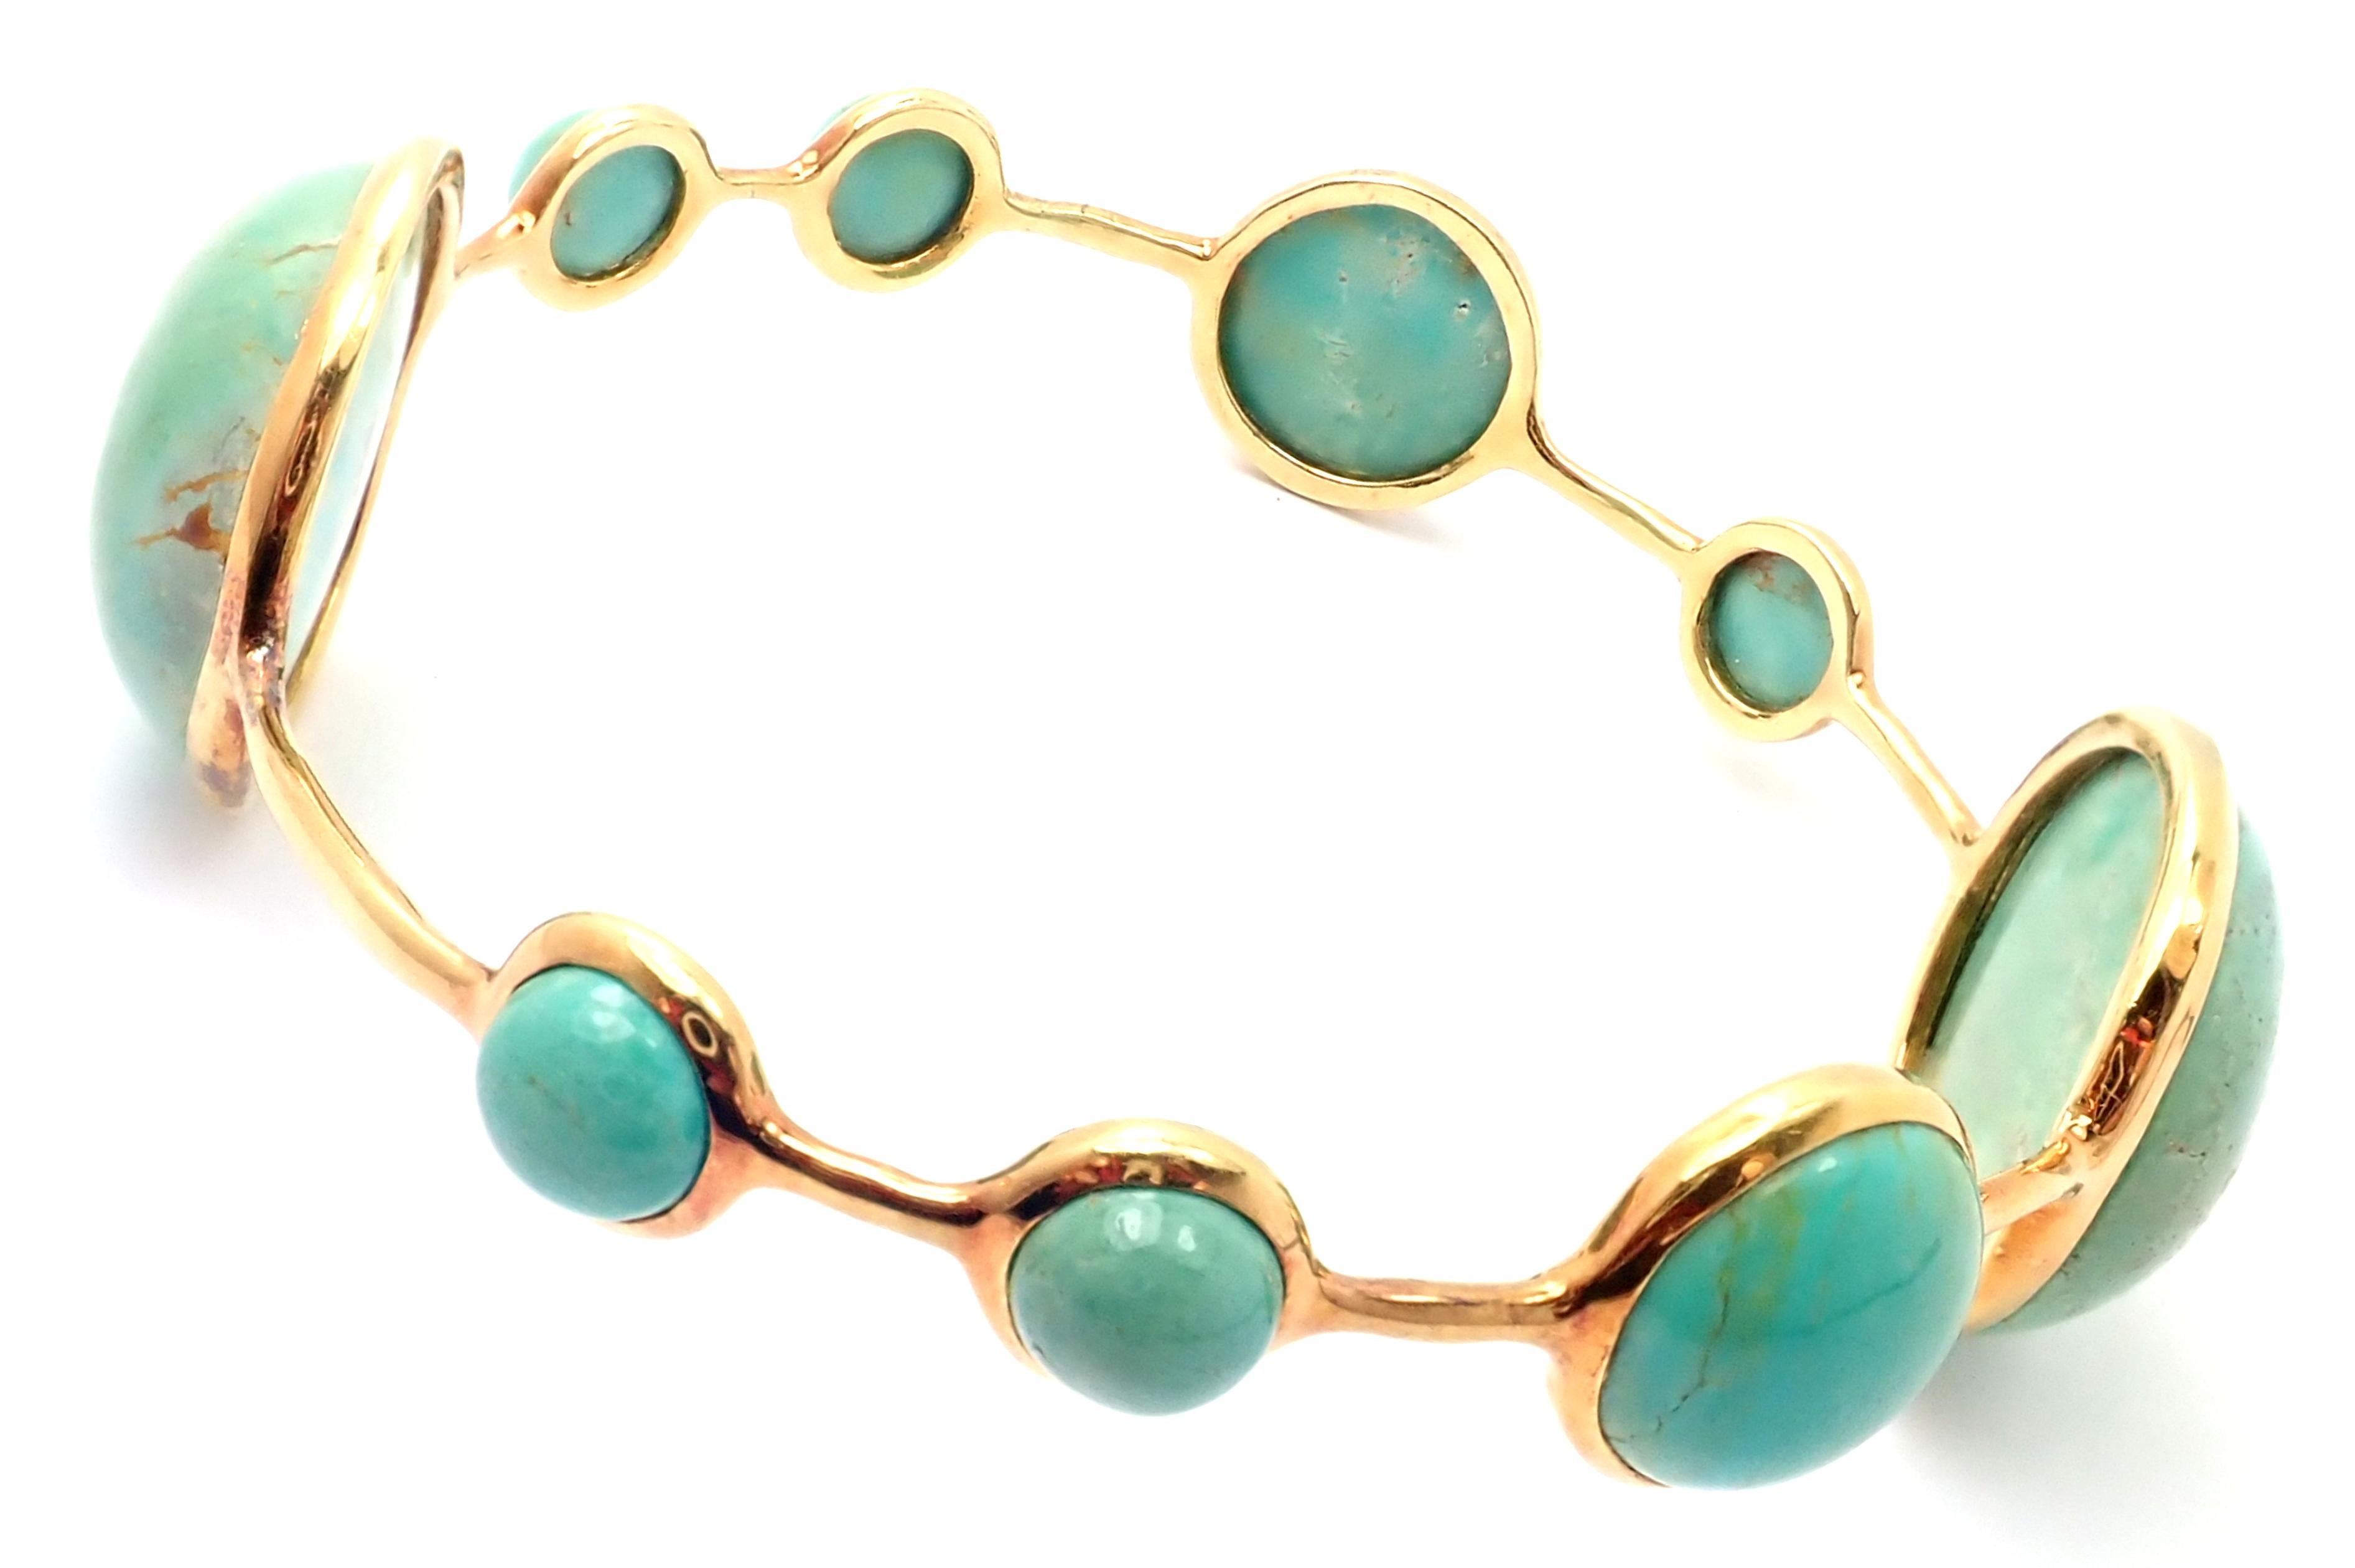 18k Yellow Gold Rock Candy Lollipop Turquoise Bangle Bracelet by Ippolita. 
With Turquoise Stones 23mm, 15mm, 9mm
Details: 
Length: 7.5